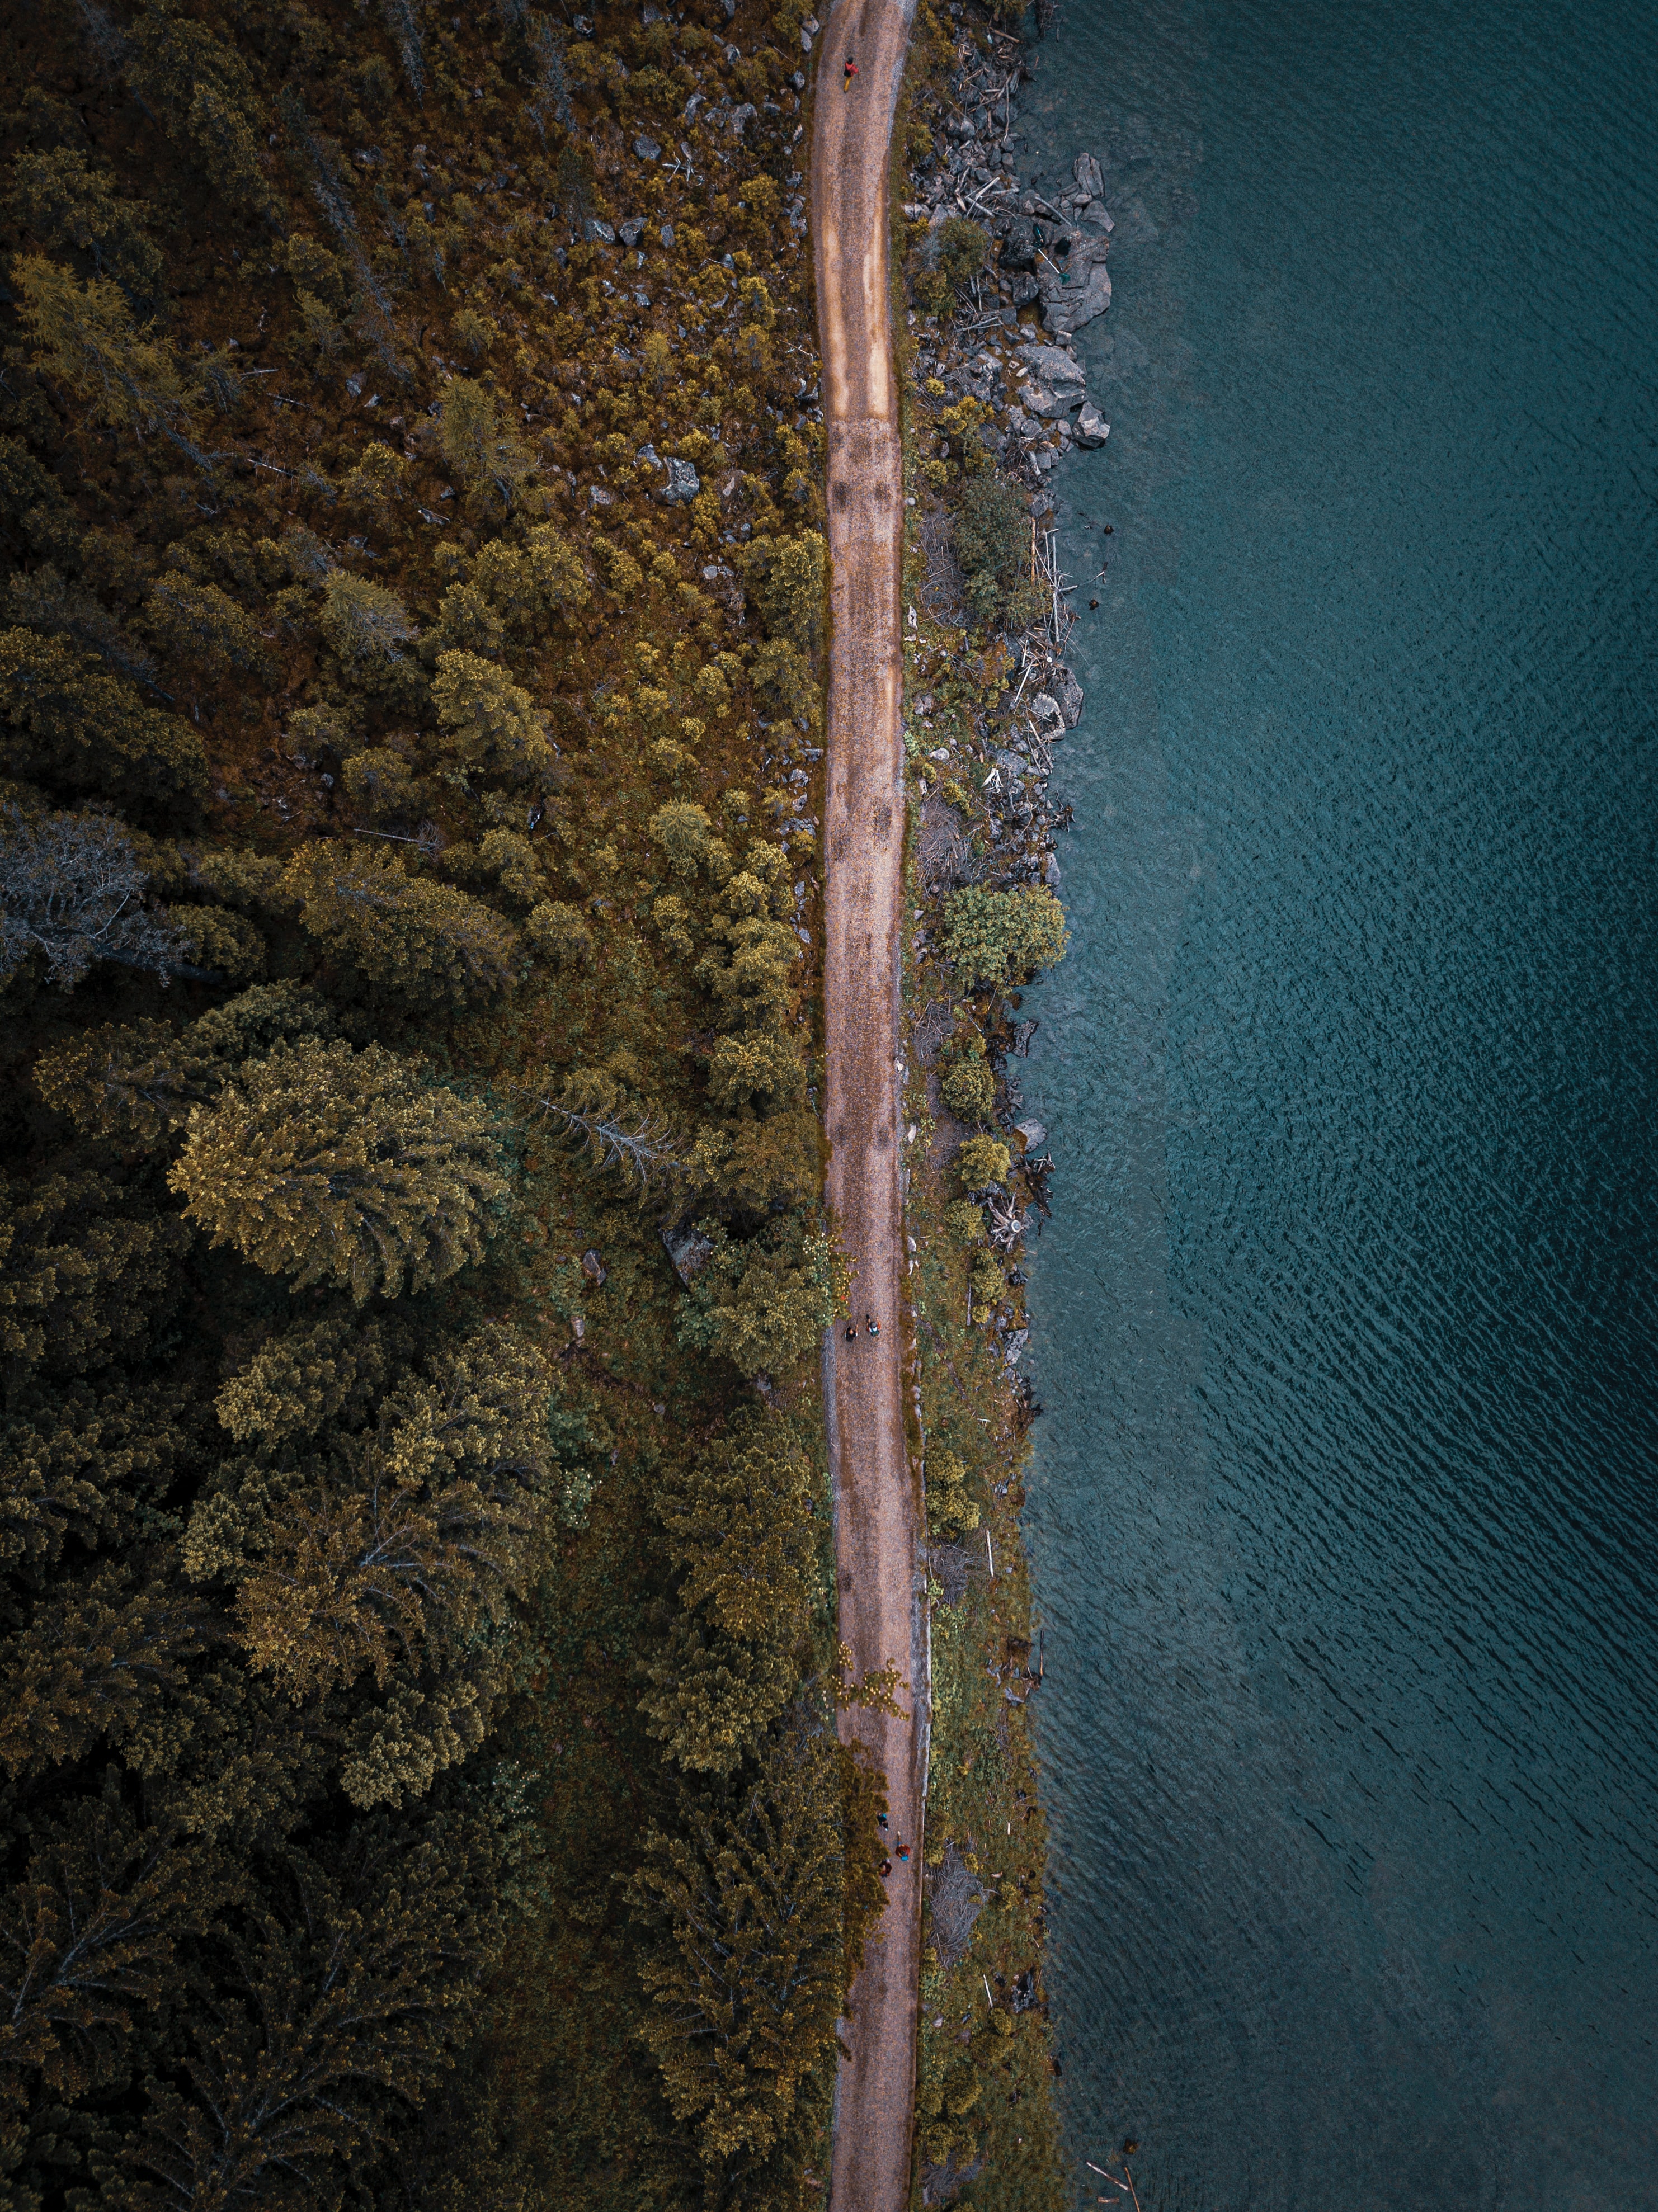 view from above, nature, trees, sea, road, forest 32K